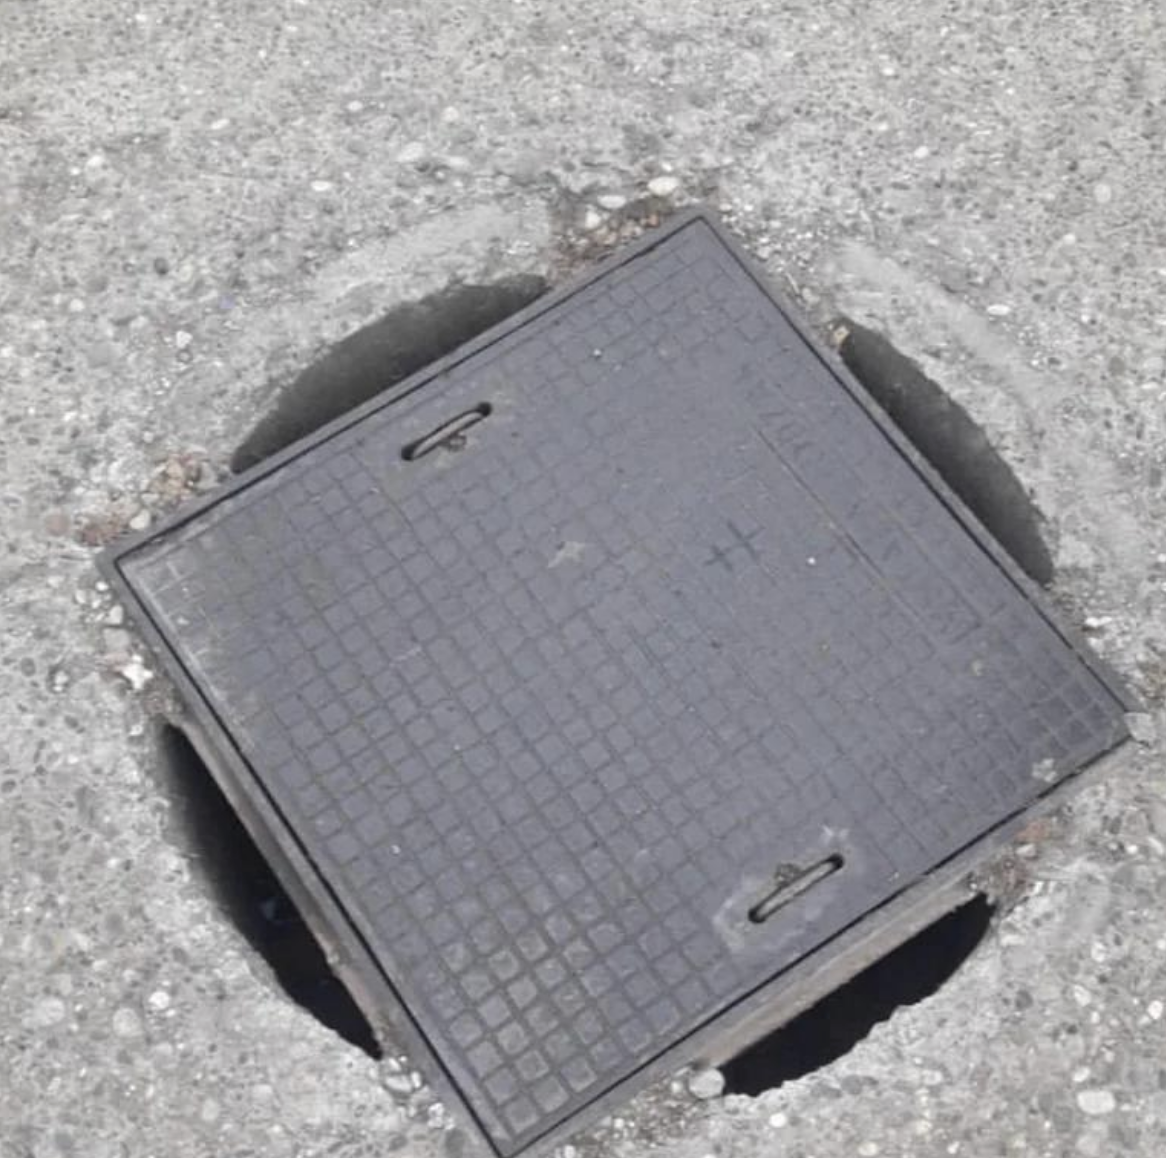 square cover on top of the circle hole